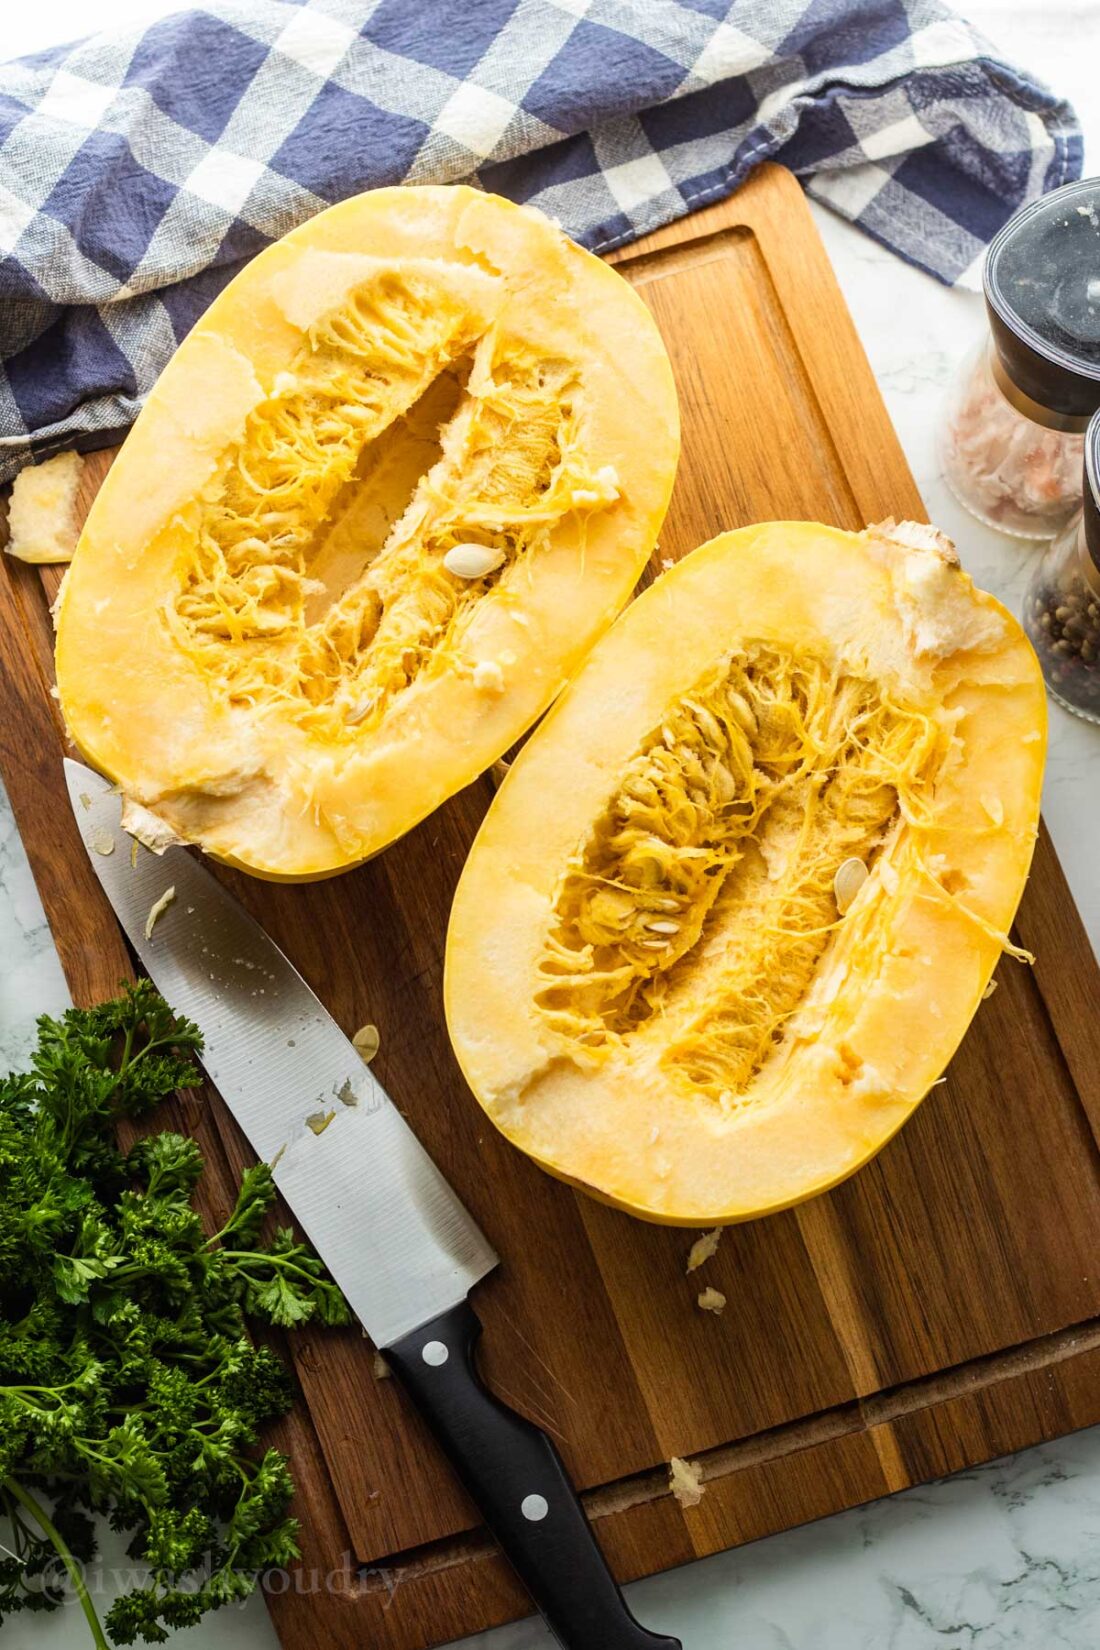 Cut squash in half, with seeds and membranes.